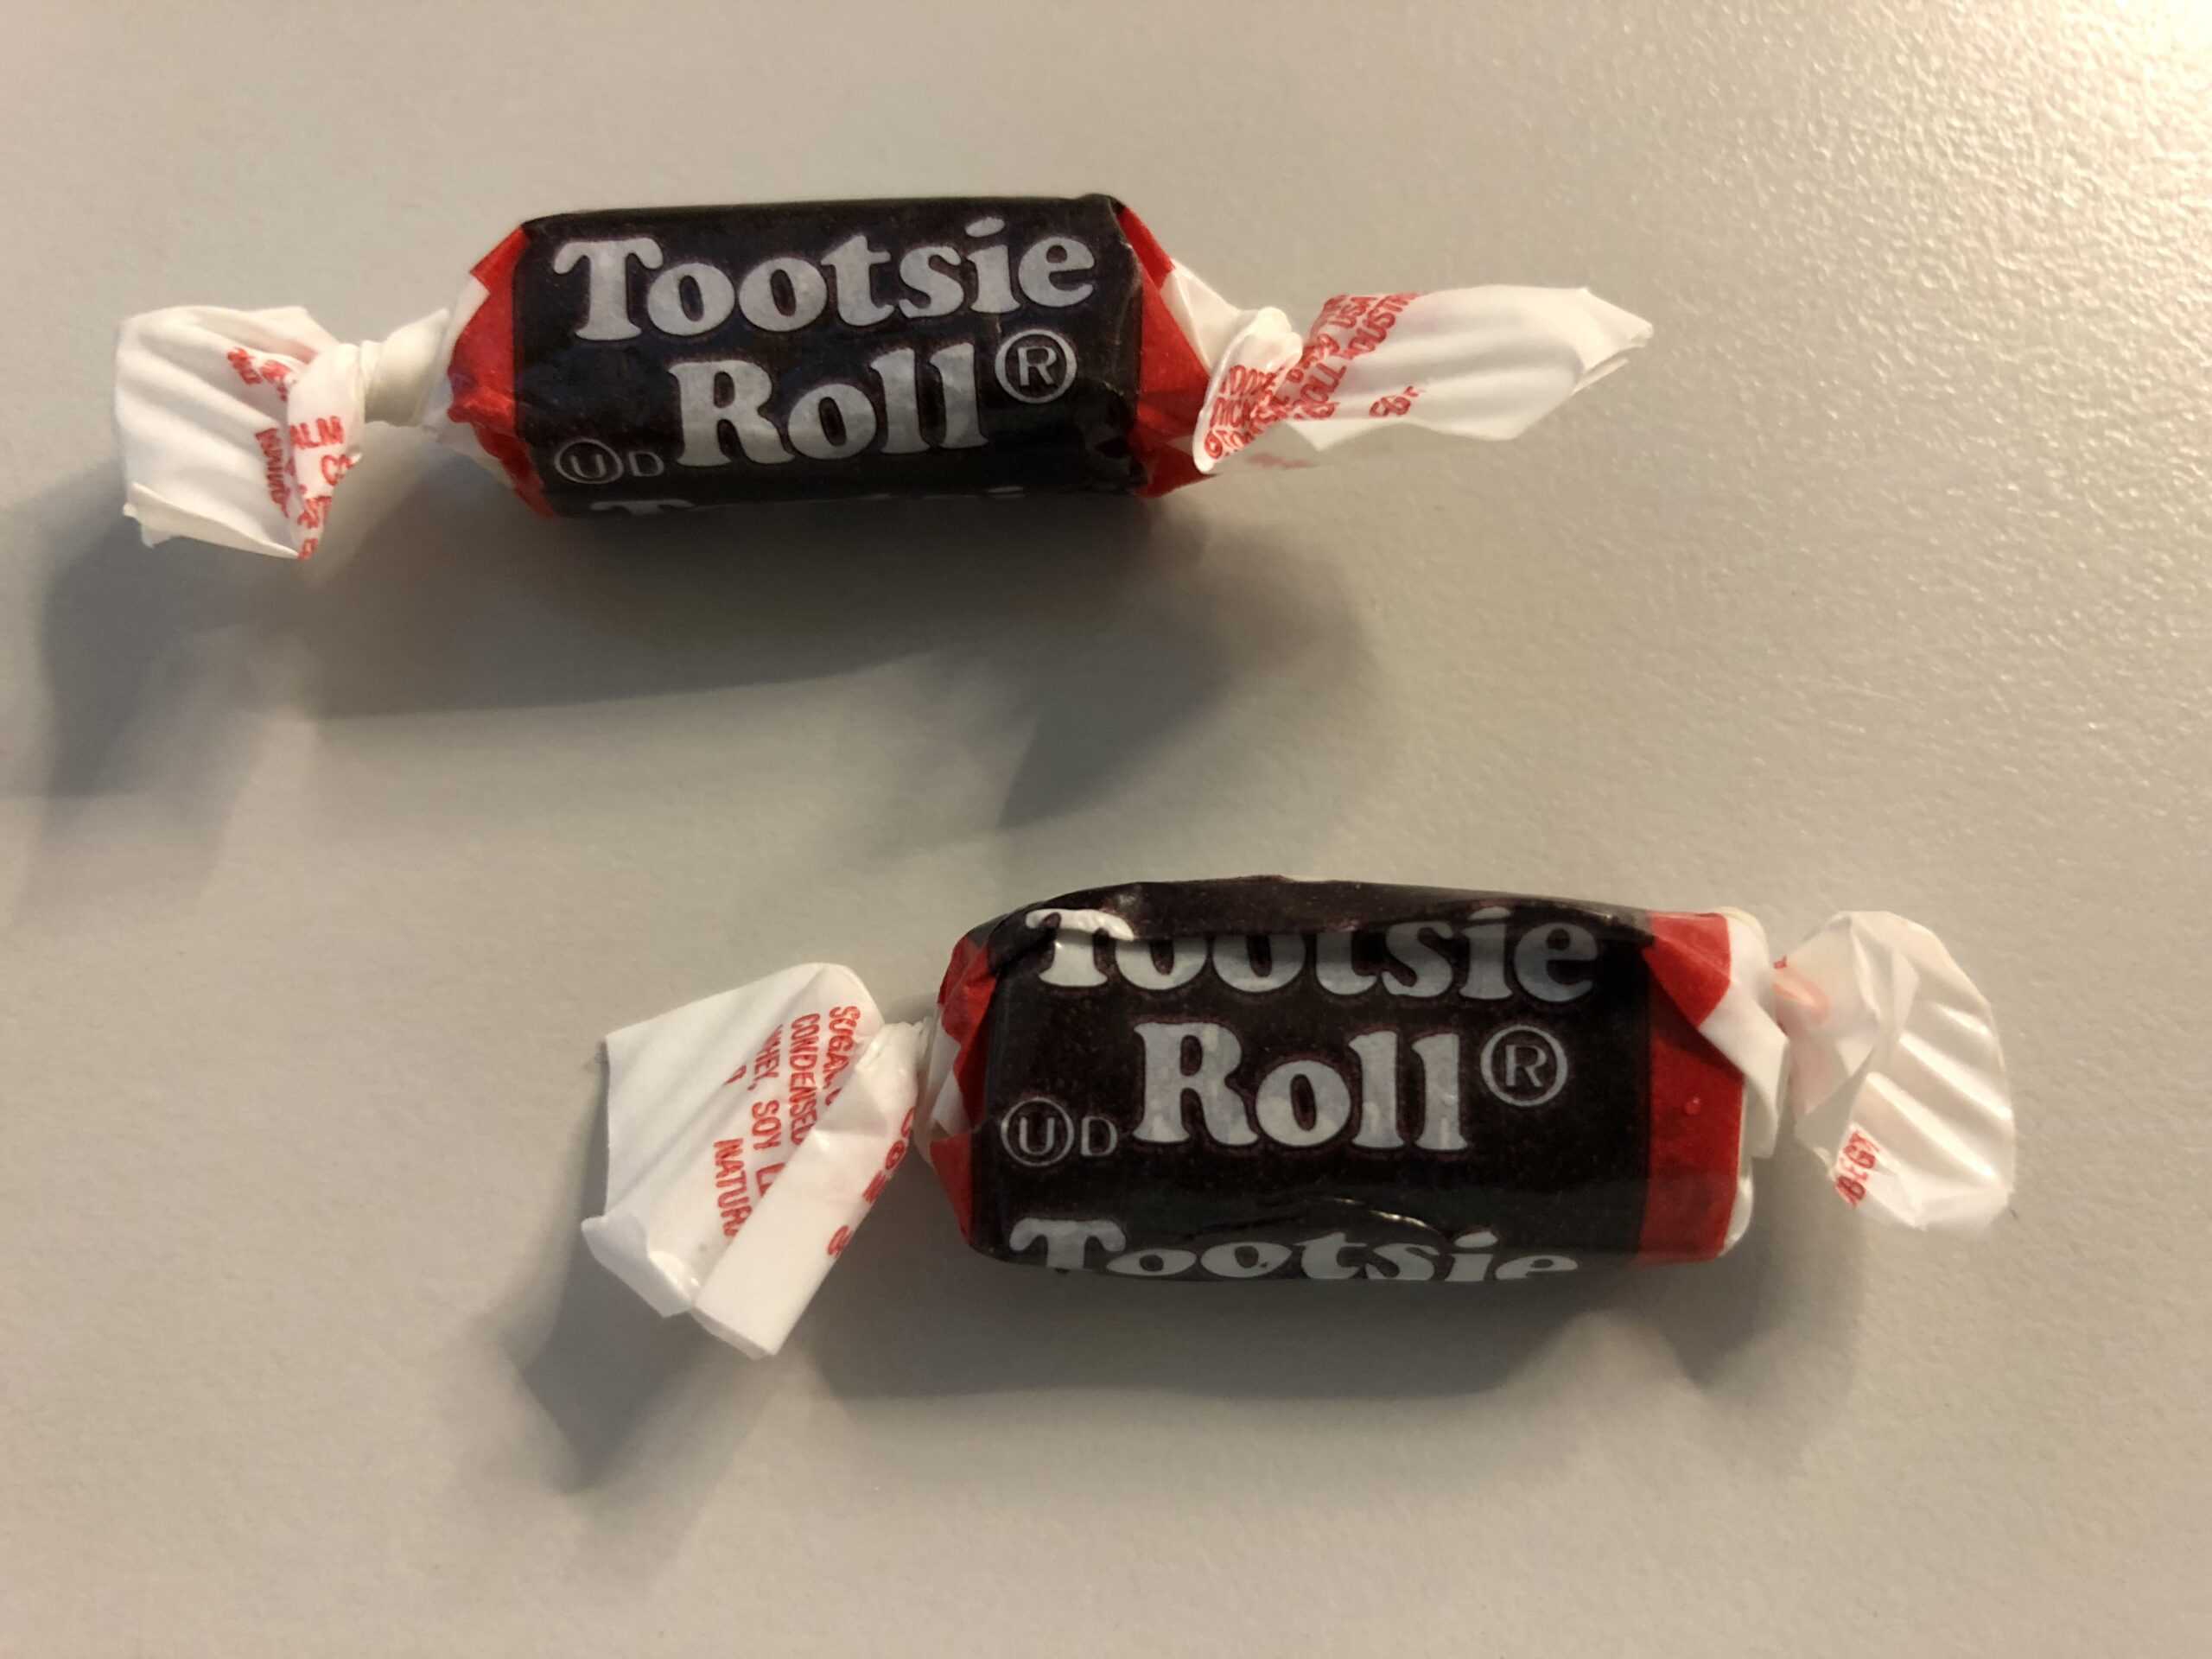 Two Tootsie Rolls in their wrappers in the Dulles section of Sterling, Loudoun County, Virginia by Famartin